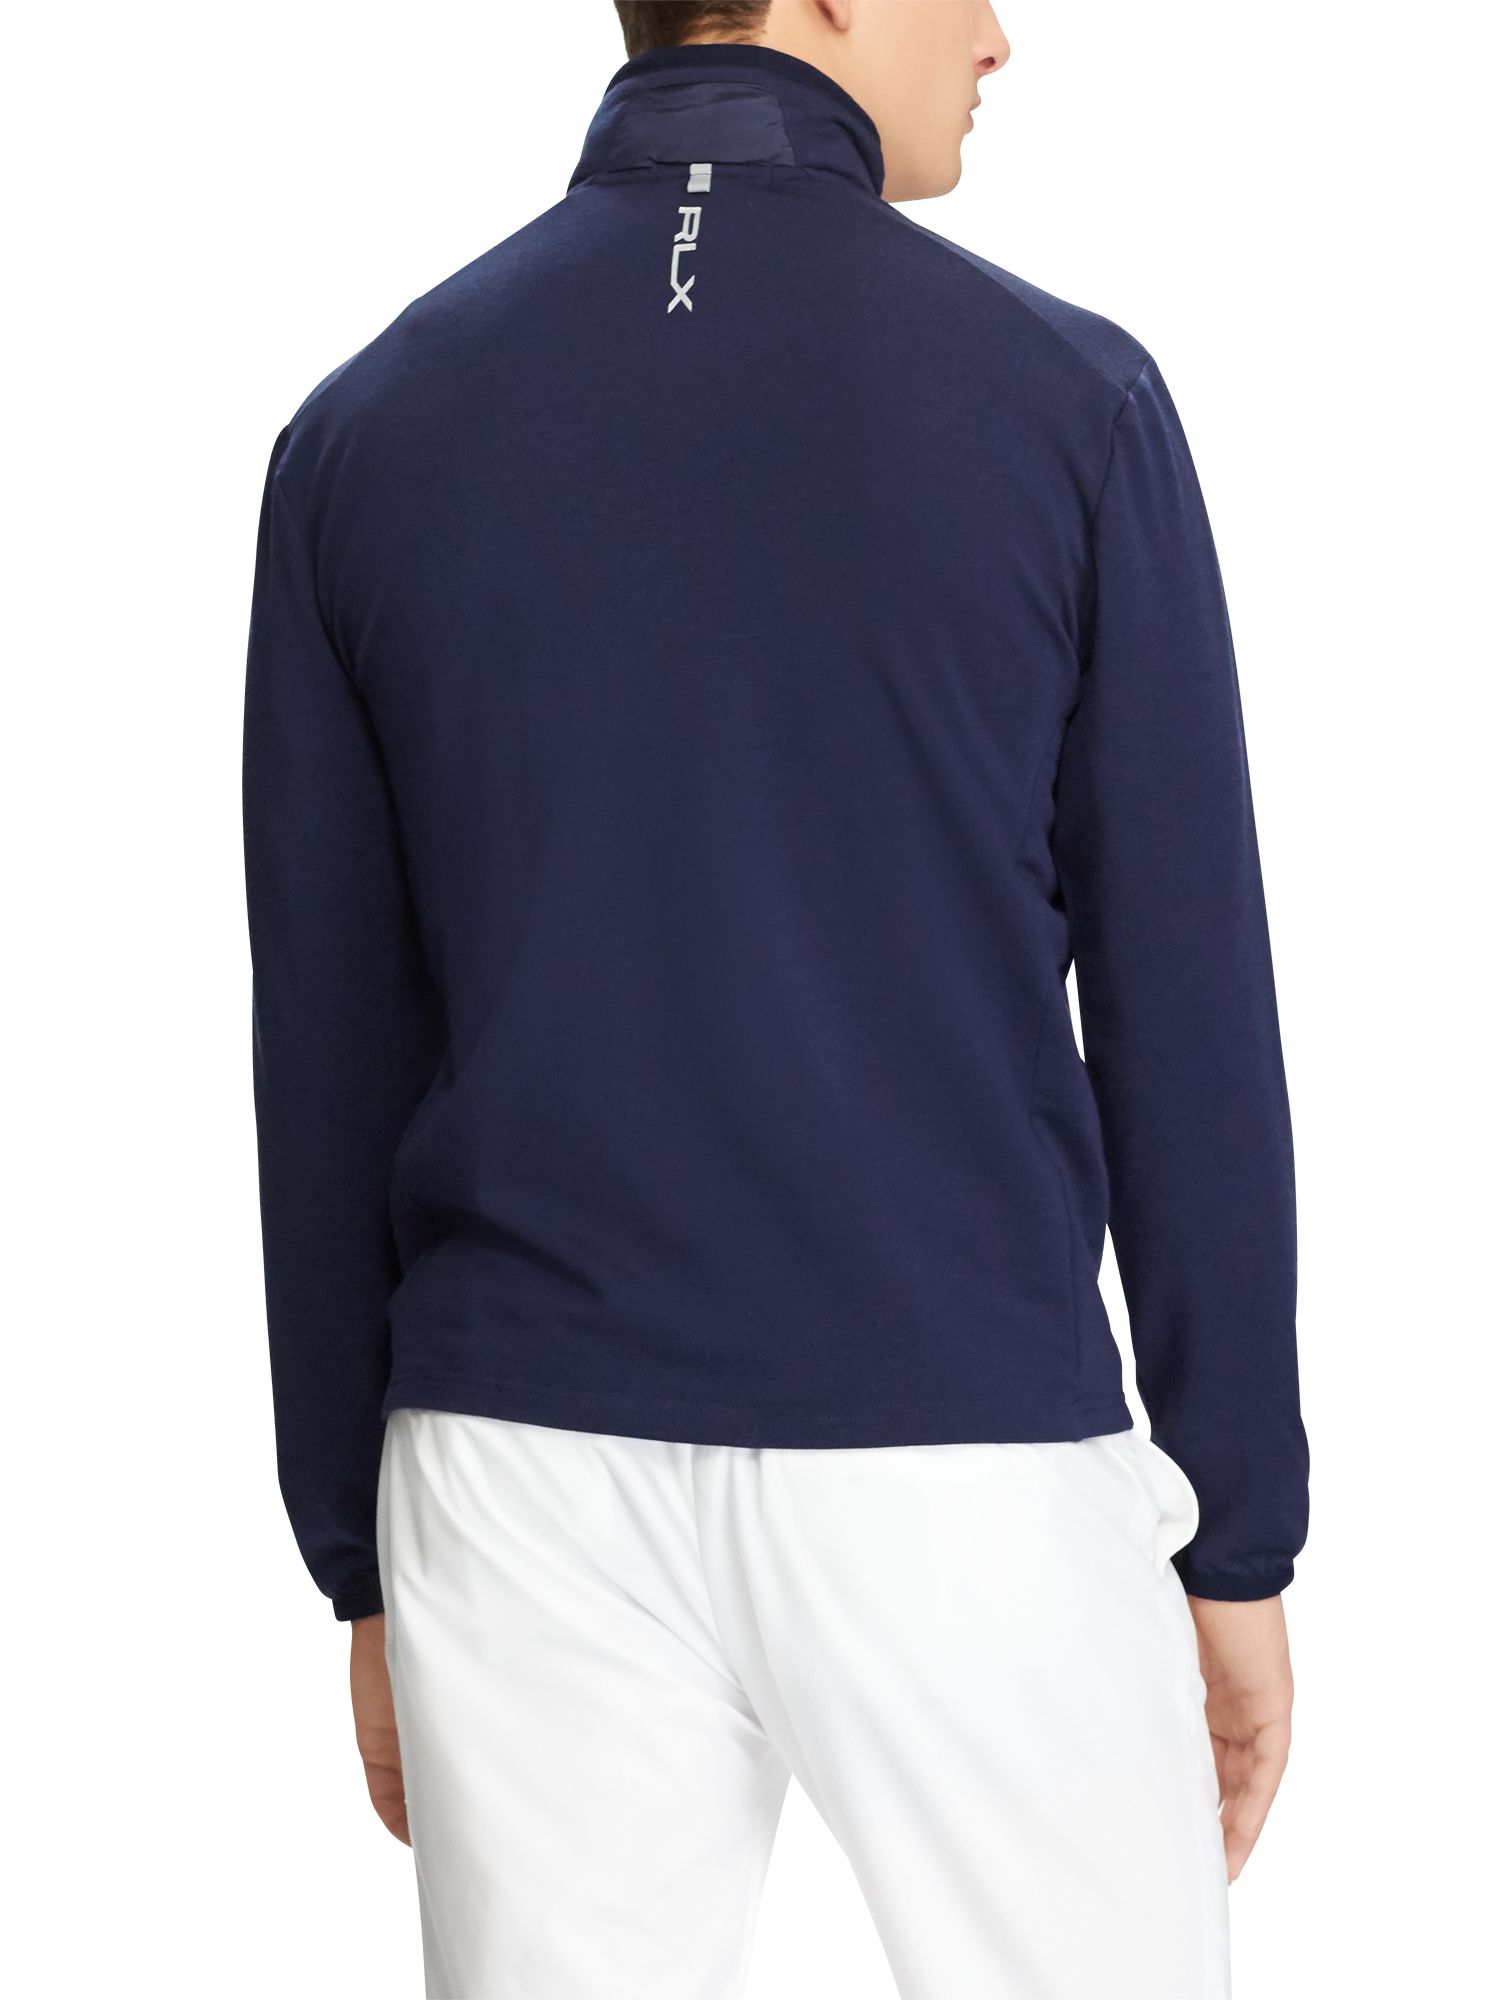 Polo Golf by Ralph Lauren Cool Wool RLX Jacket, French Navy at John ...